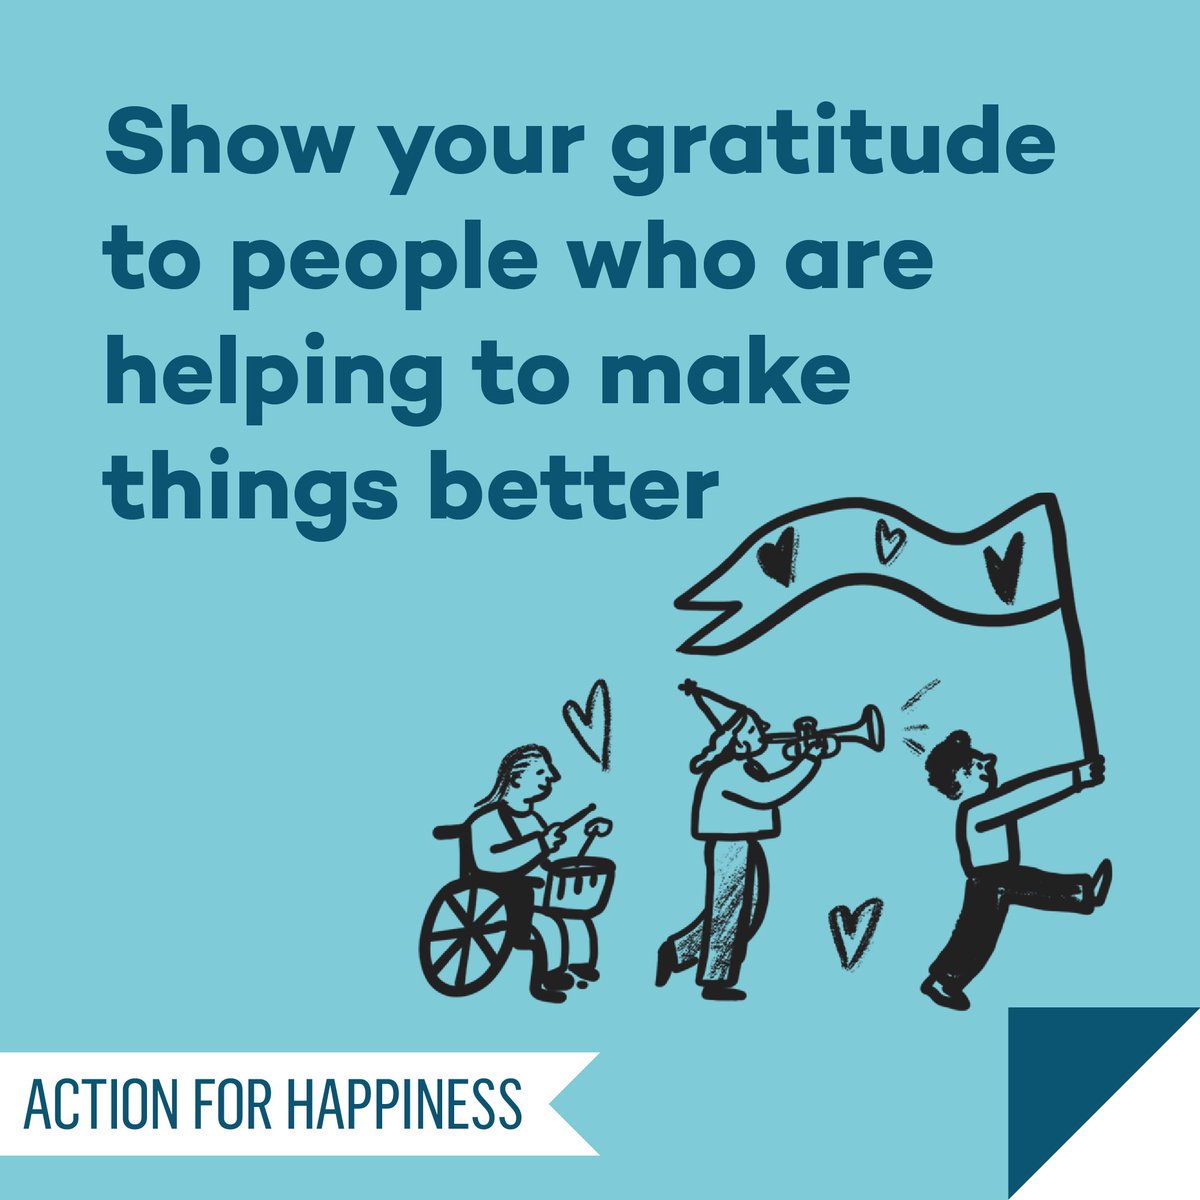 Meaningful May - Day 16: Show your gratitude to people who are helping to make things better actionforhappiness.org/meaningful-may #MeaningfulMay